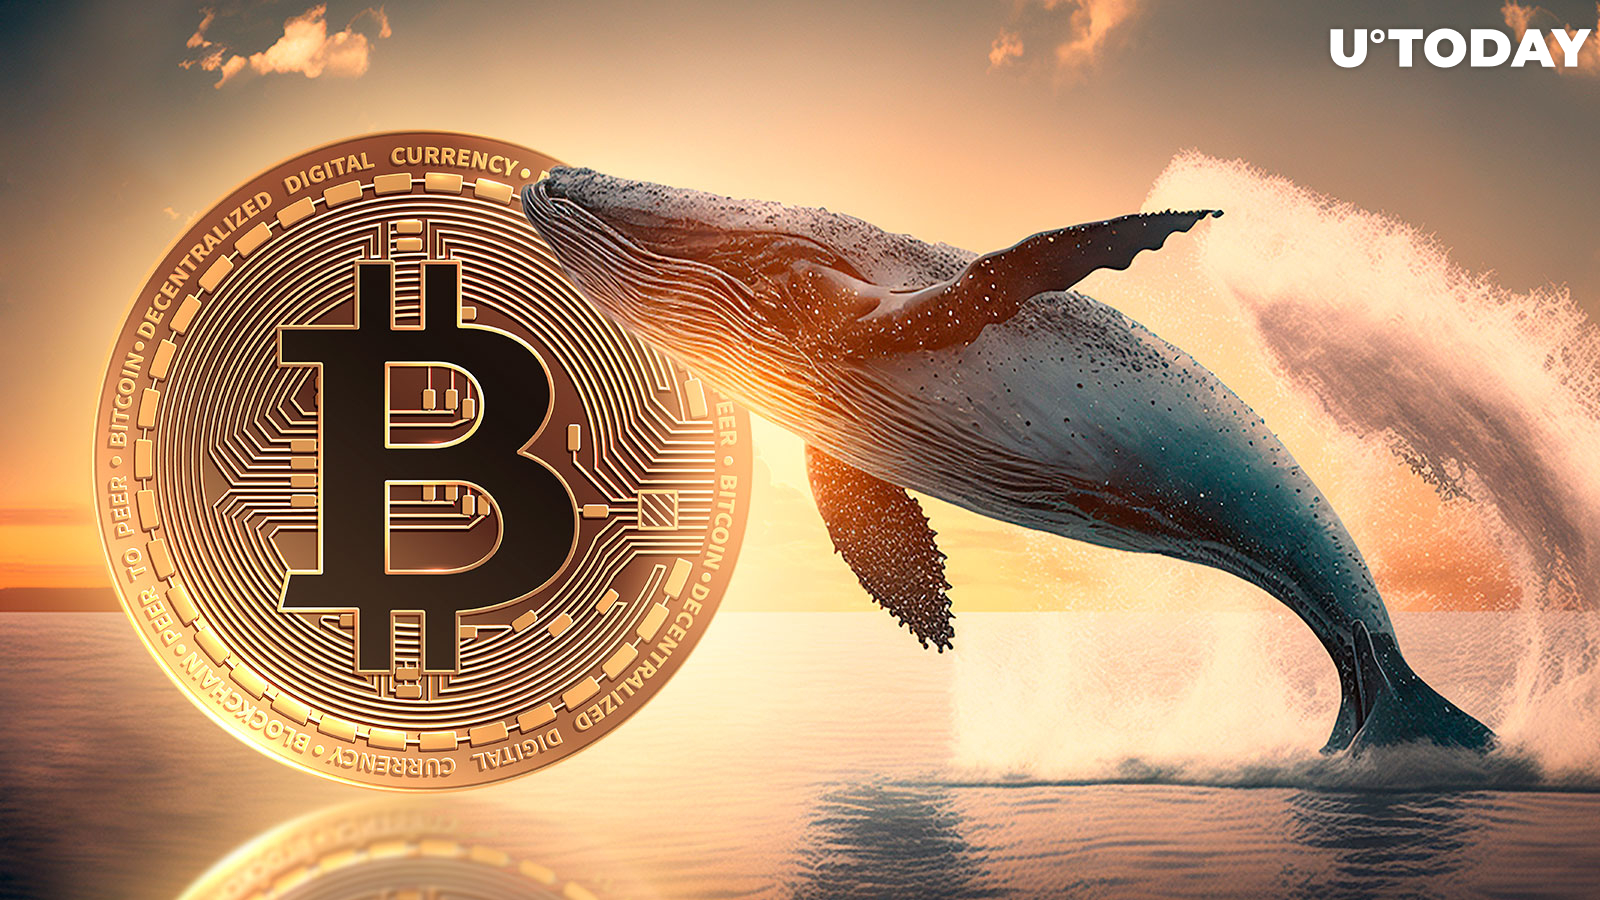  Bitcoin Whale Goes on Massive Selling Spree